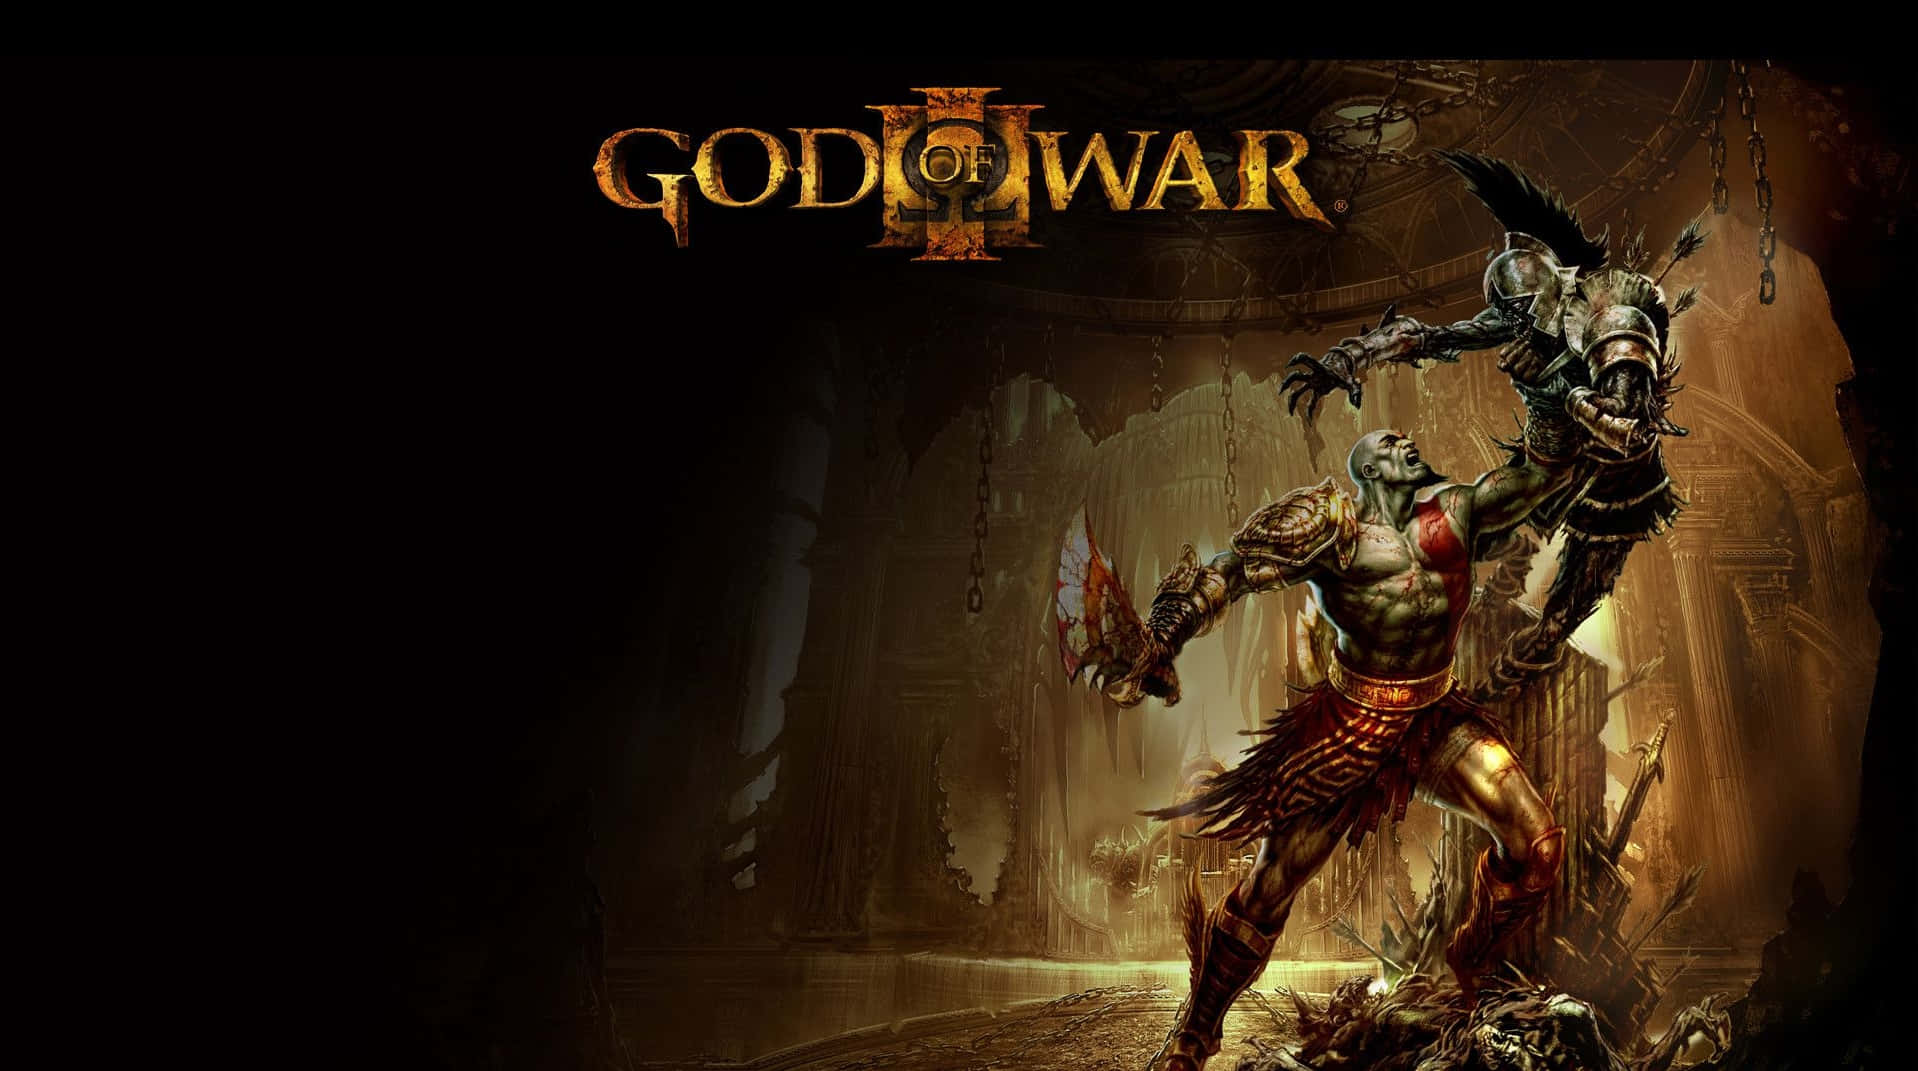 Join Kratos on his epic journey to the top of Mount Olympus in God of War III. Wallpaper